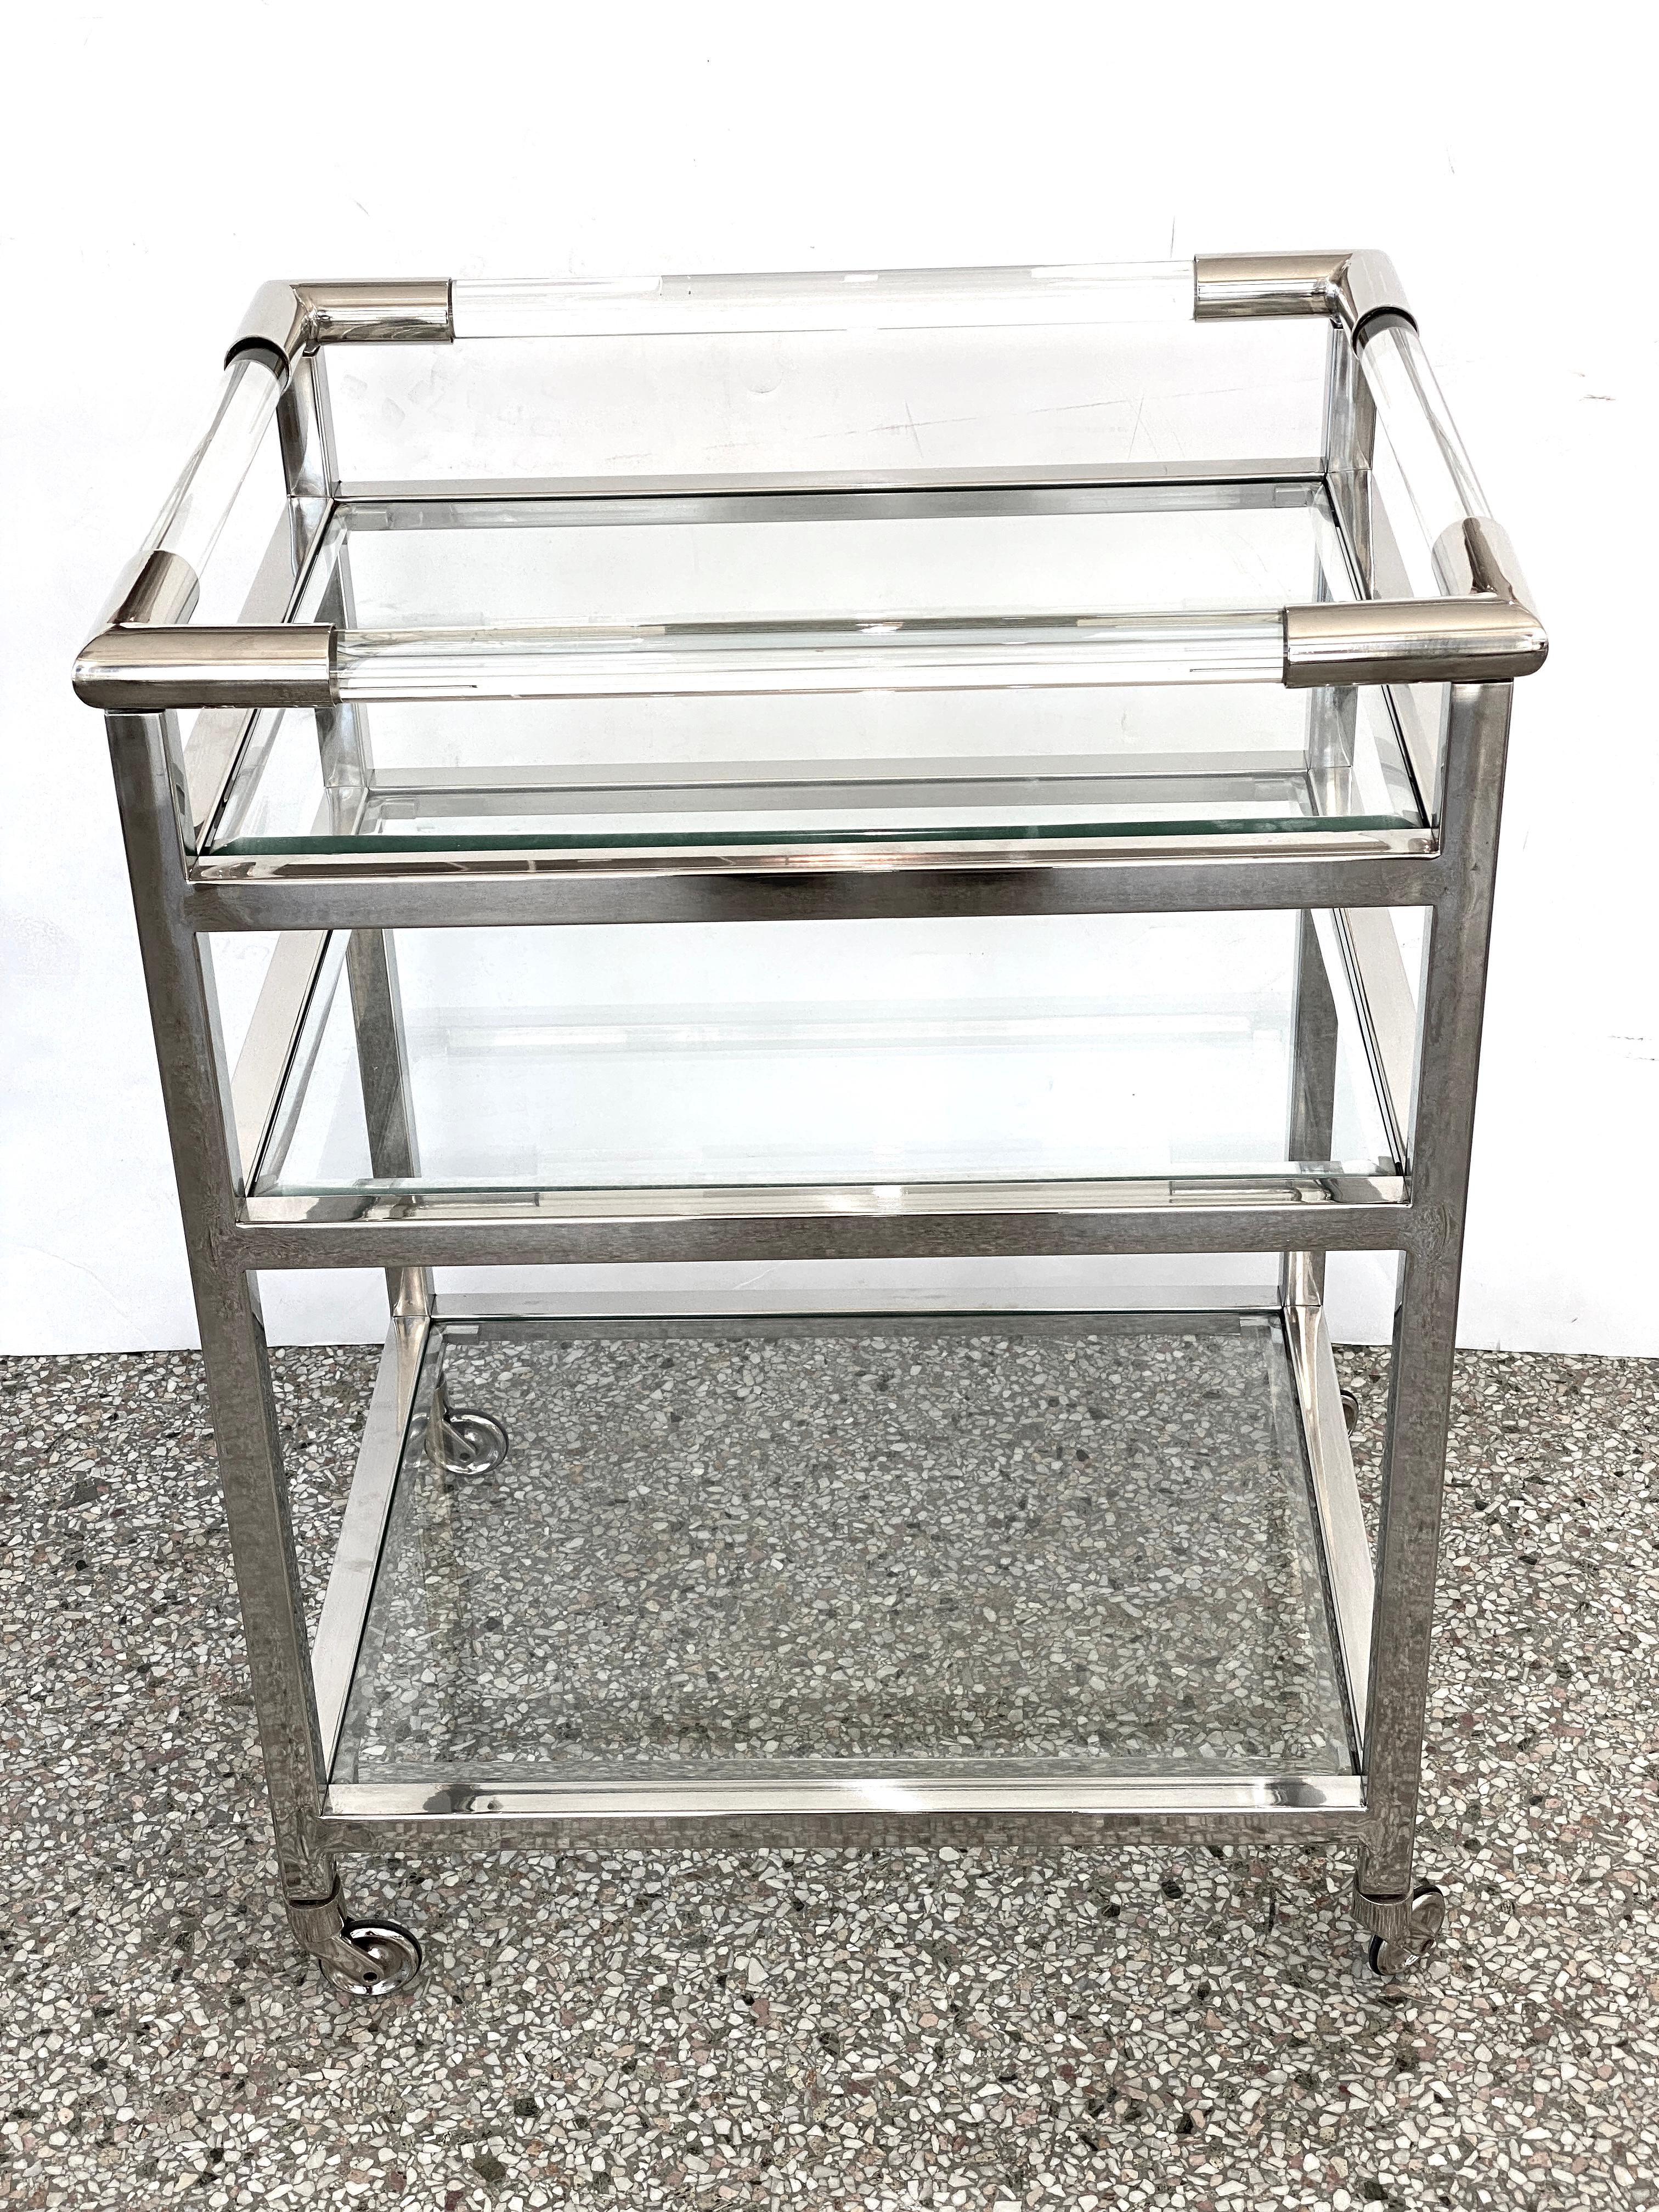 This stylish and chic Charles Hollis Jones inspired bar cart will make a statement with its clean lines and use of materials.